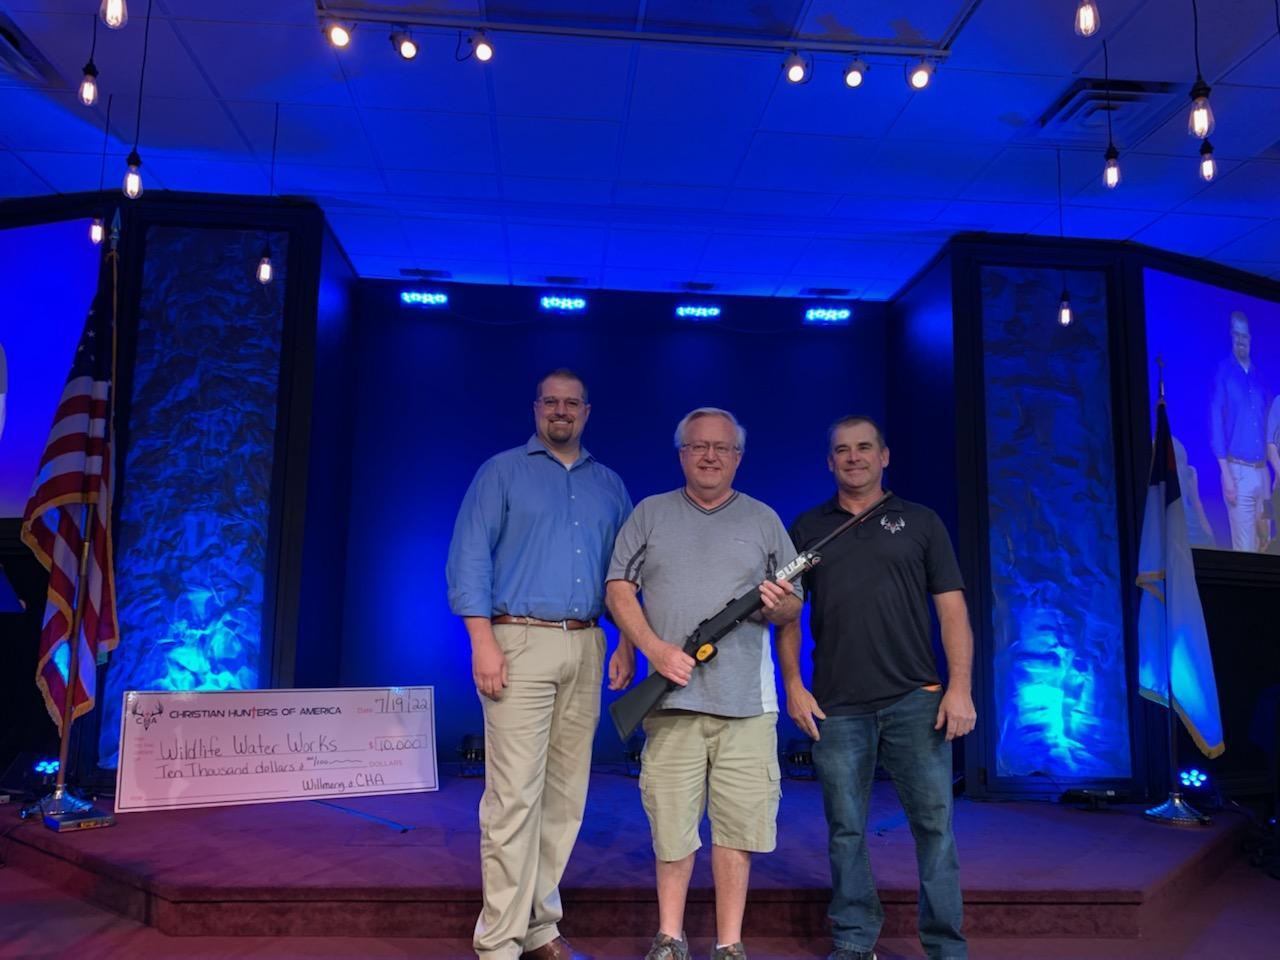 Three Christian men standing on stage with a rifle.